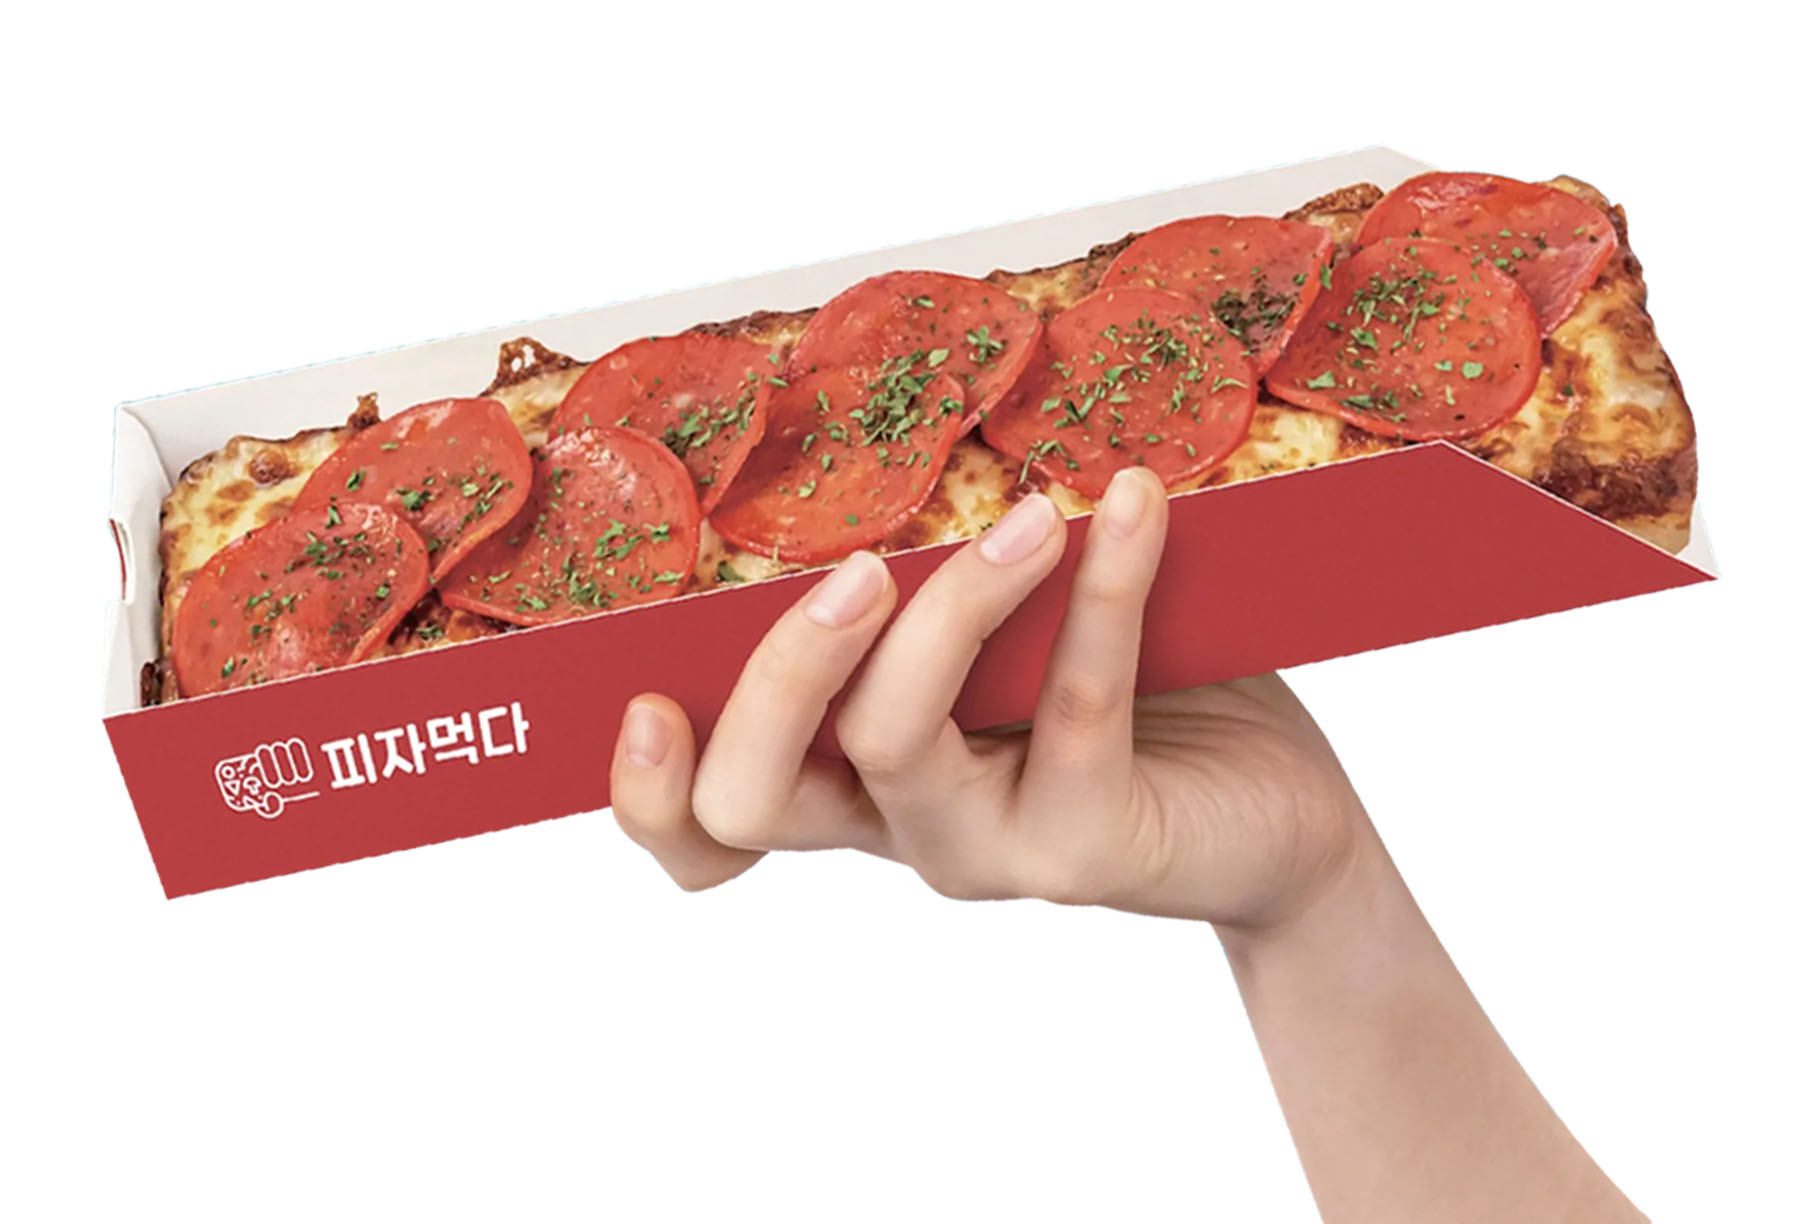 Korea’s famous single-serve pizza chain to open in PH this year